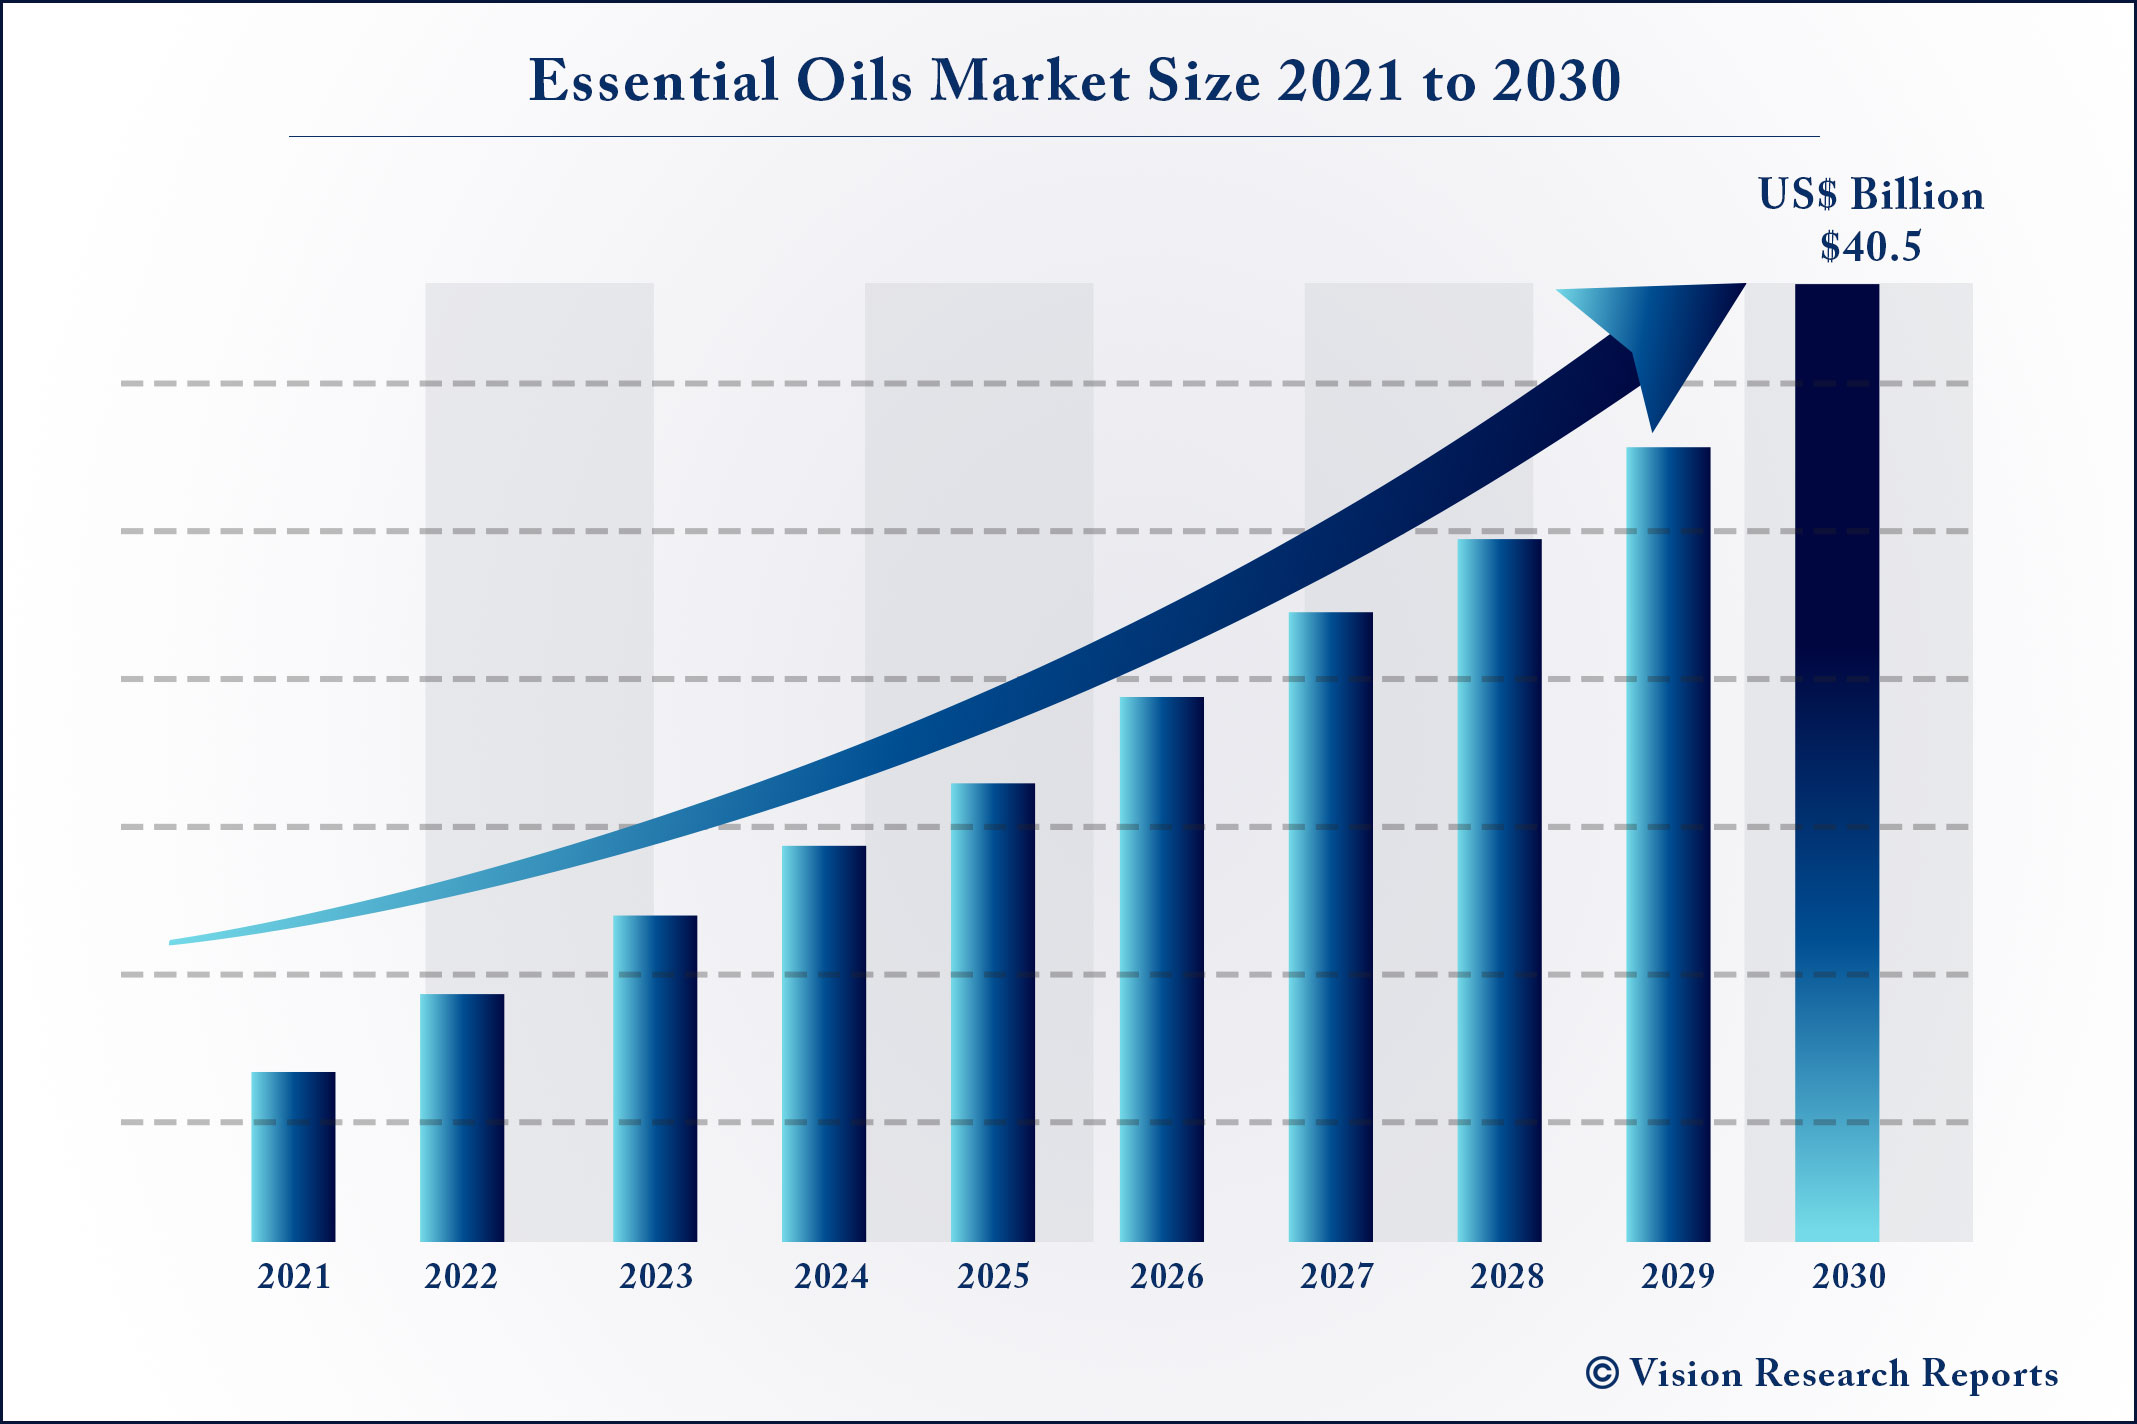 Essential Oils Market Size 2021 to 2030